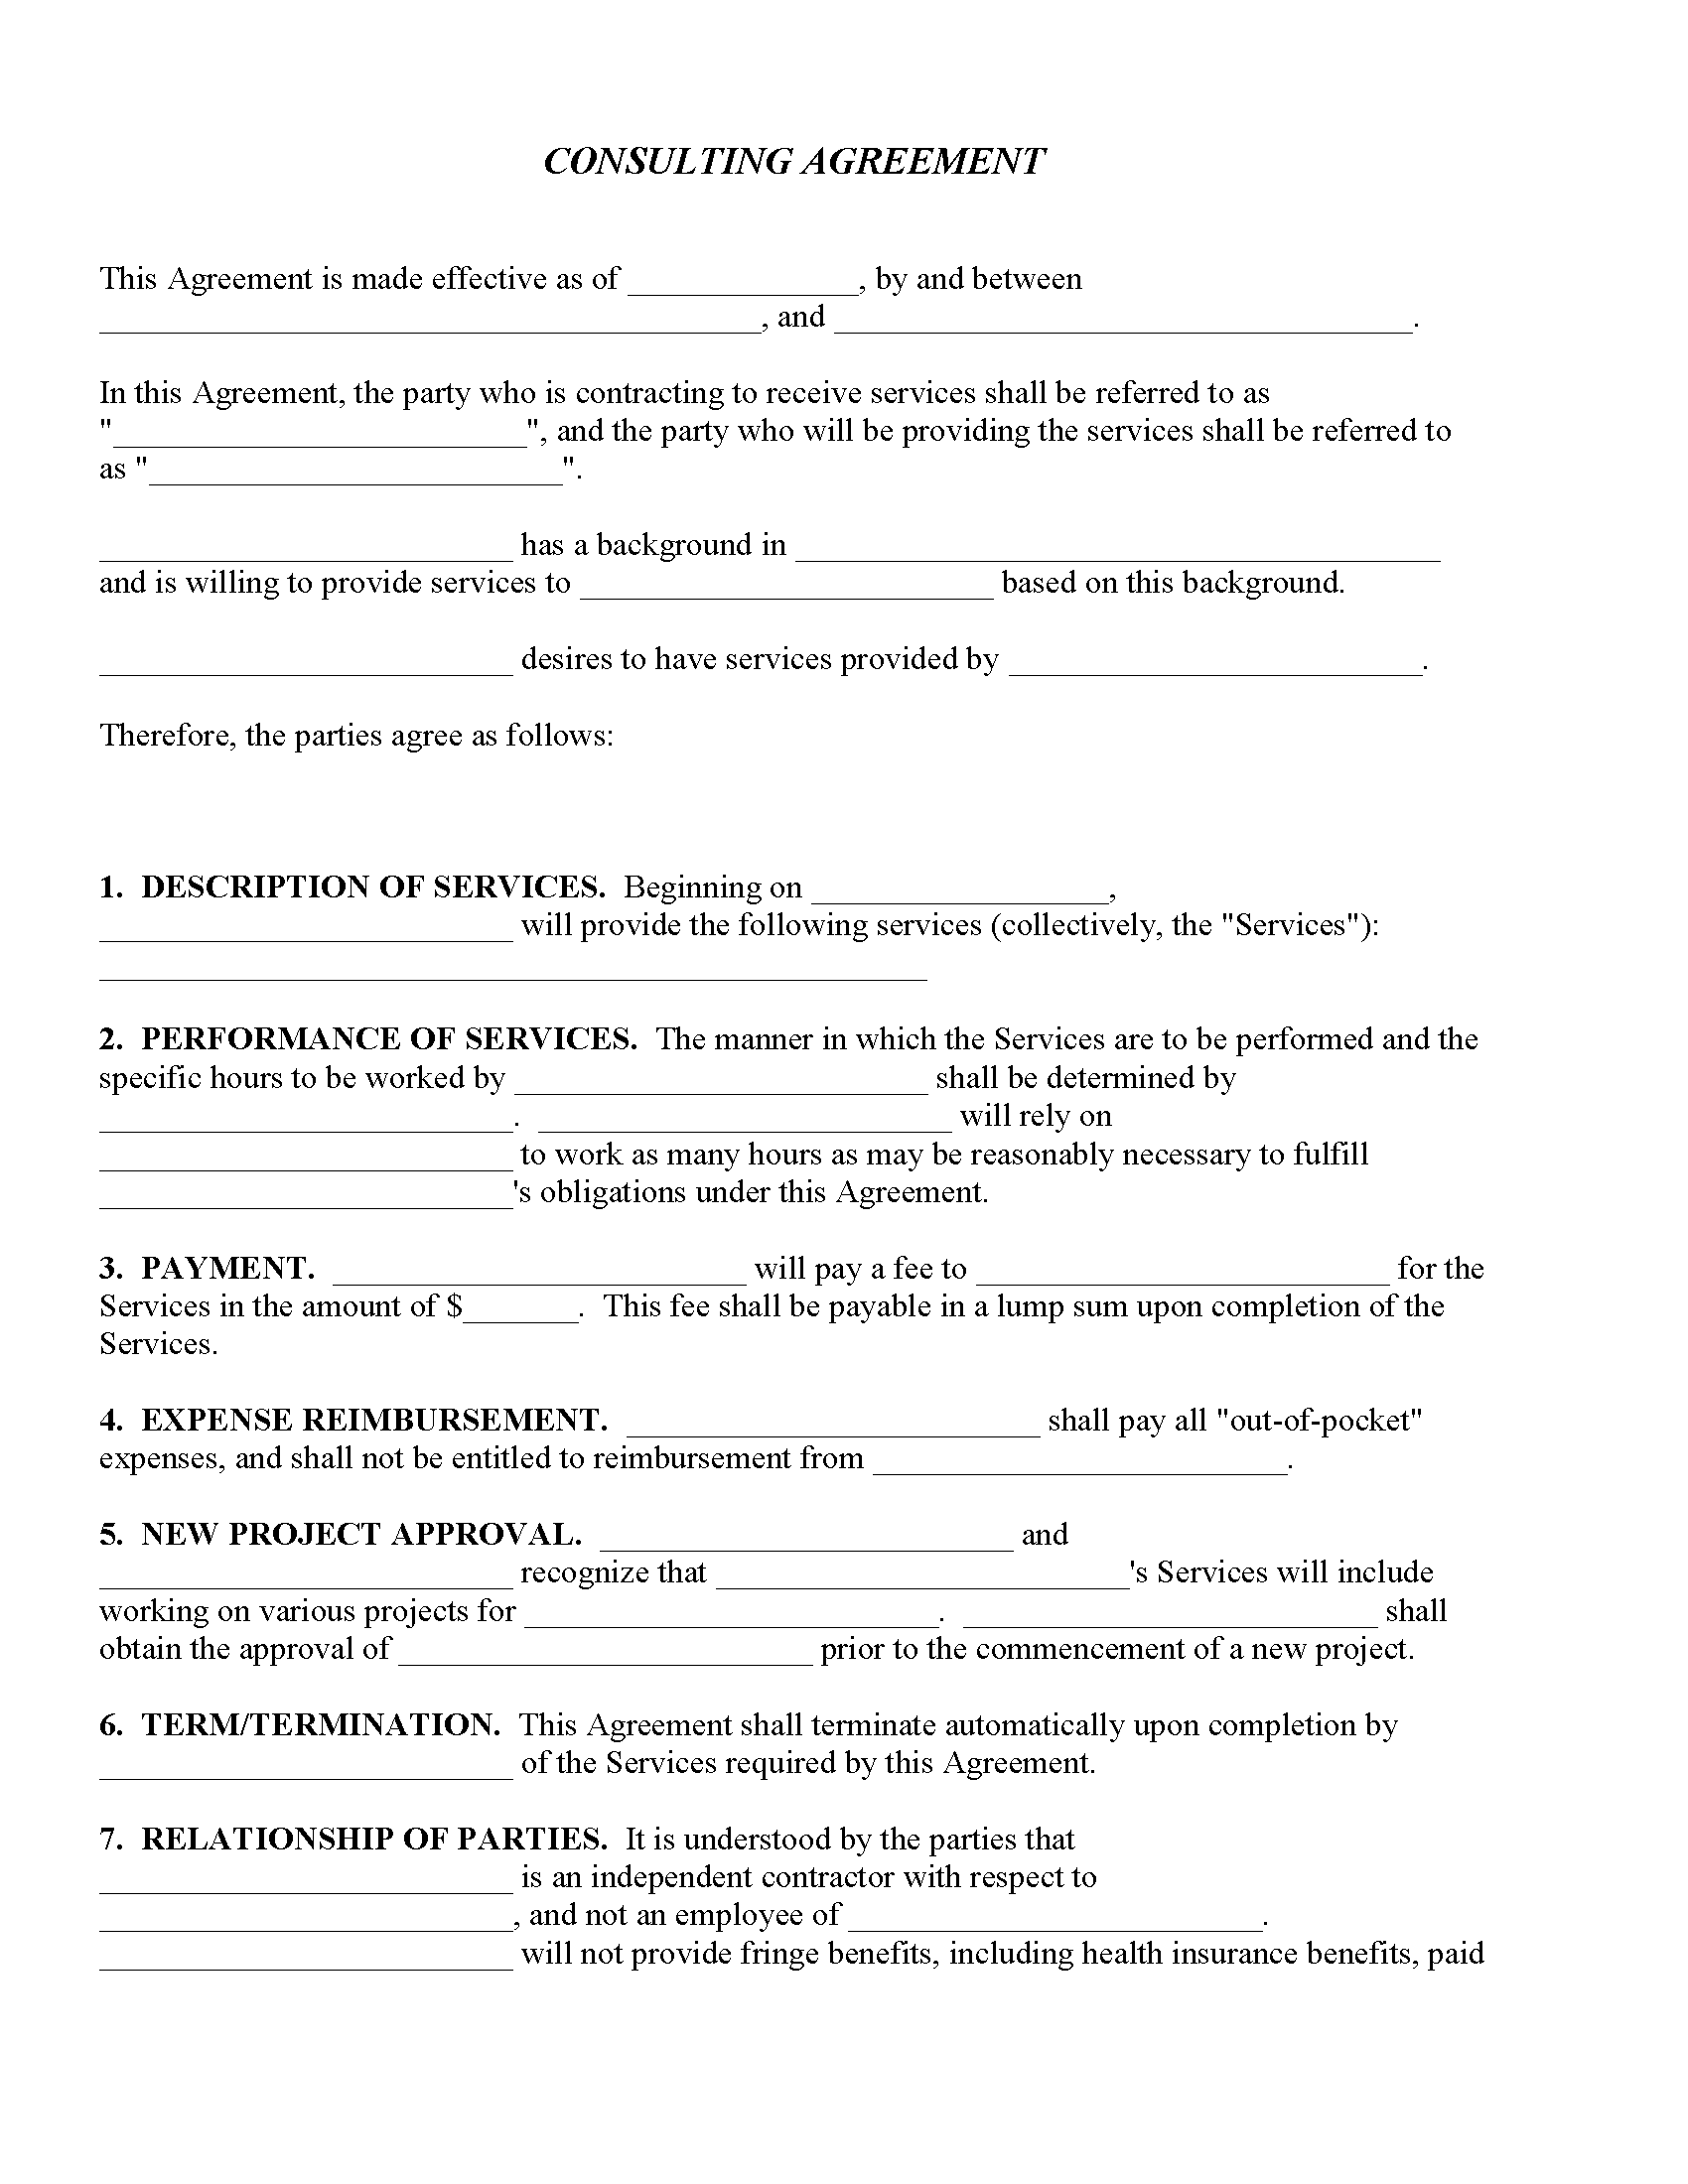 Consulting Agreement Fillable PDF Free Printable Legal Forms